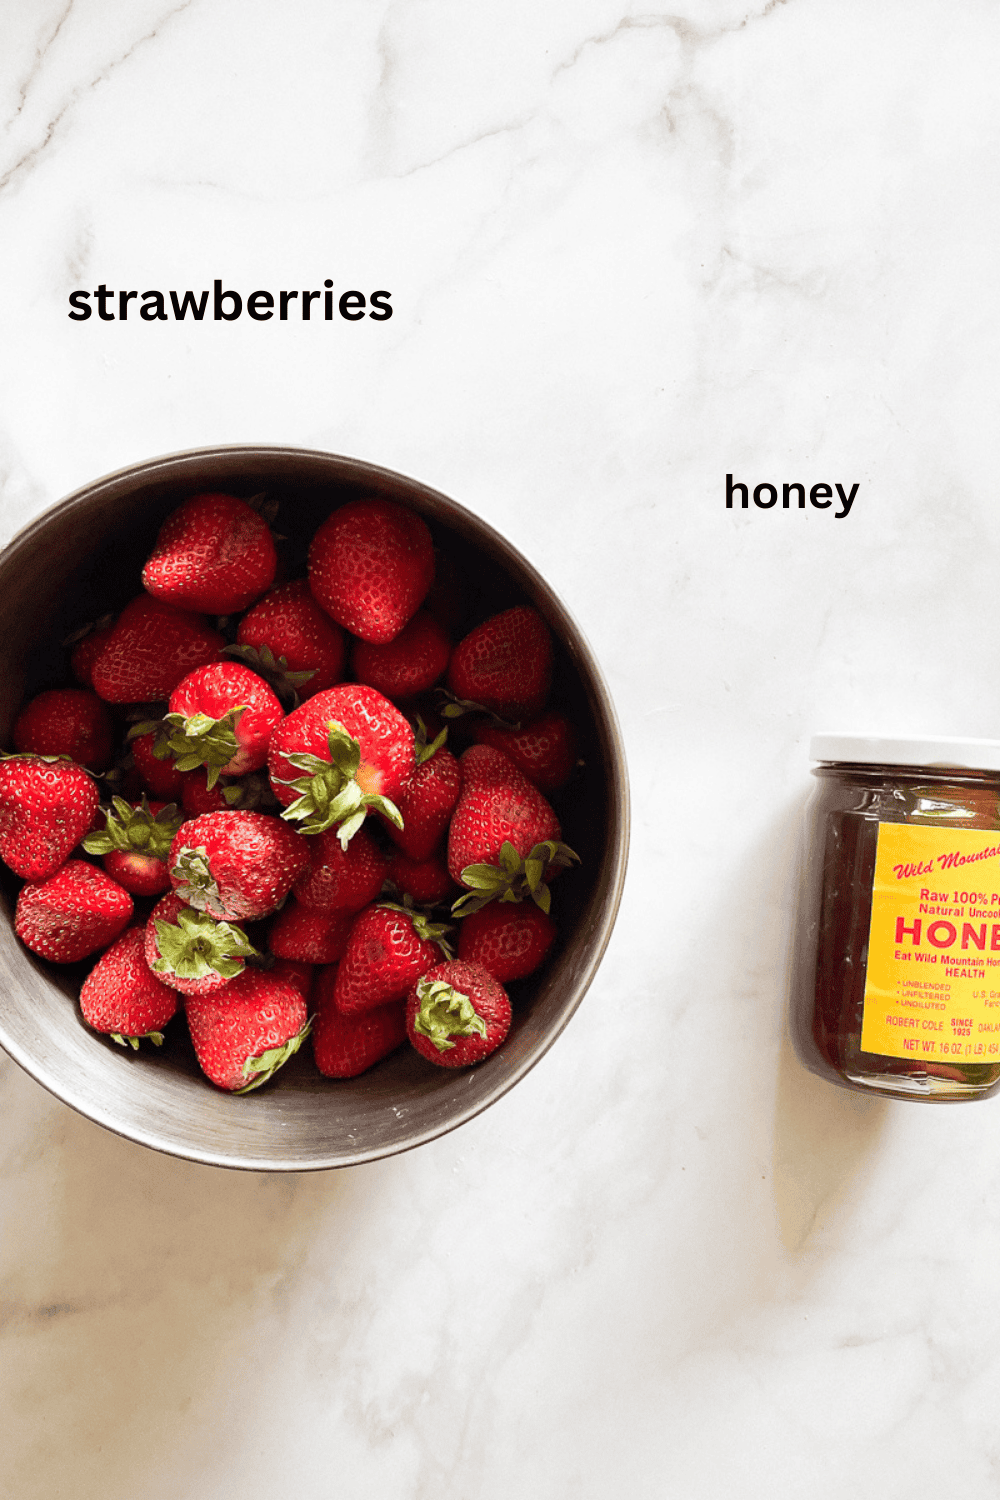 Ingredients for strawberry honey jam include strawberries and honey.